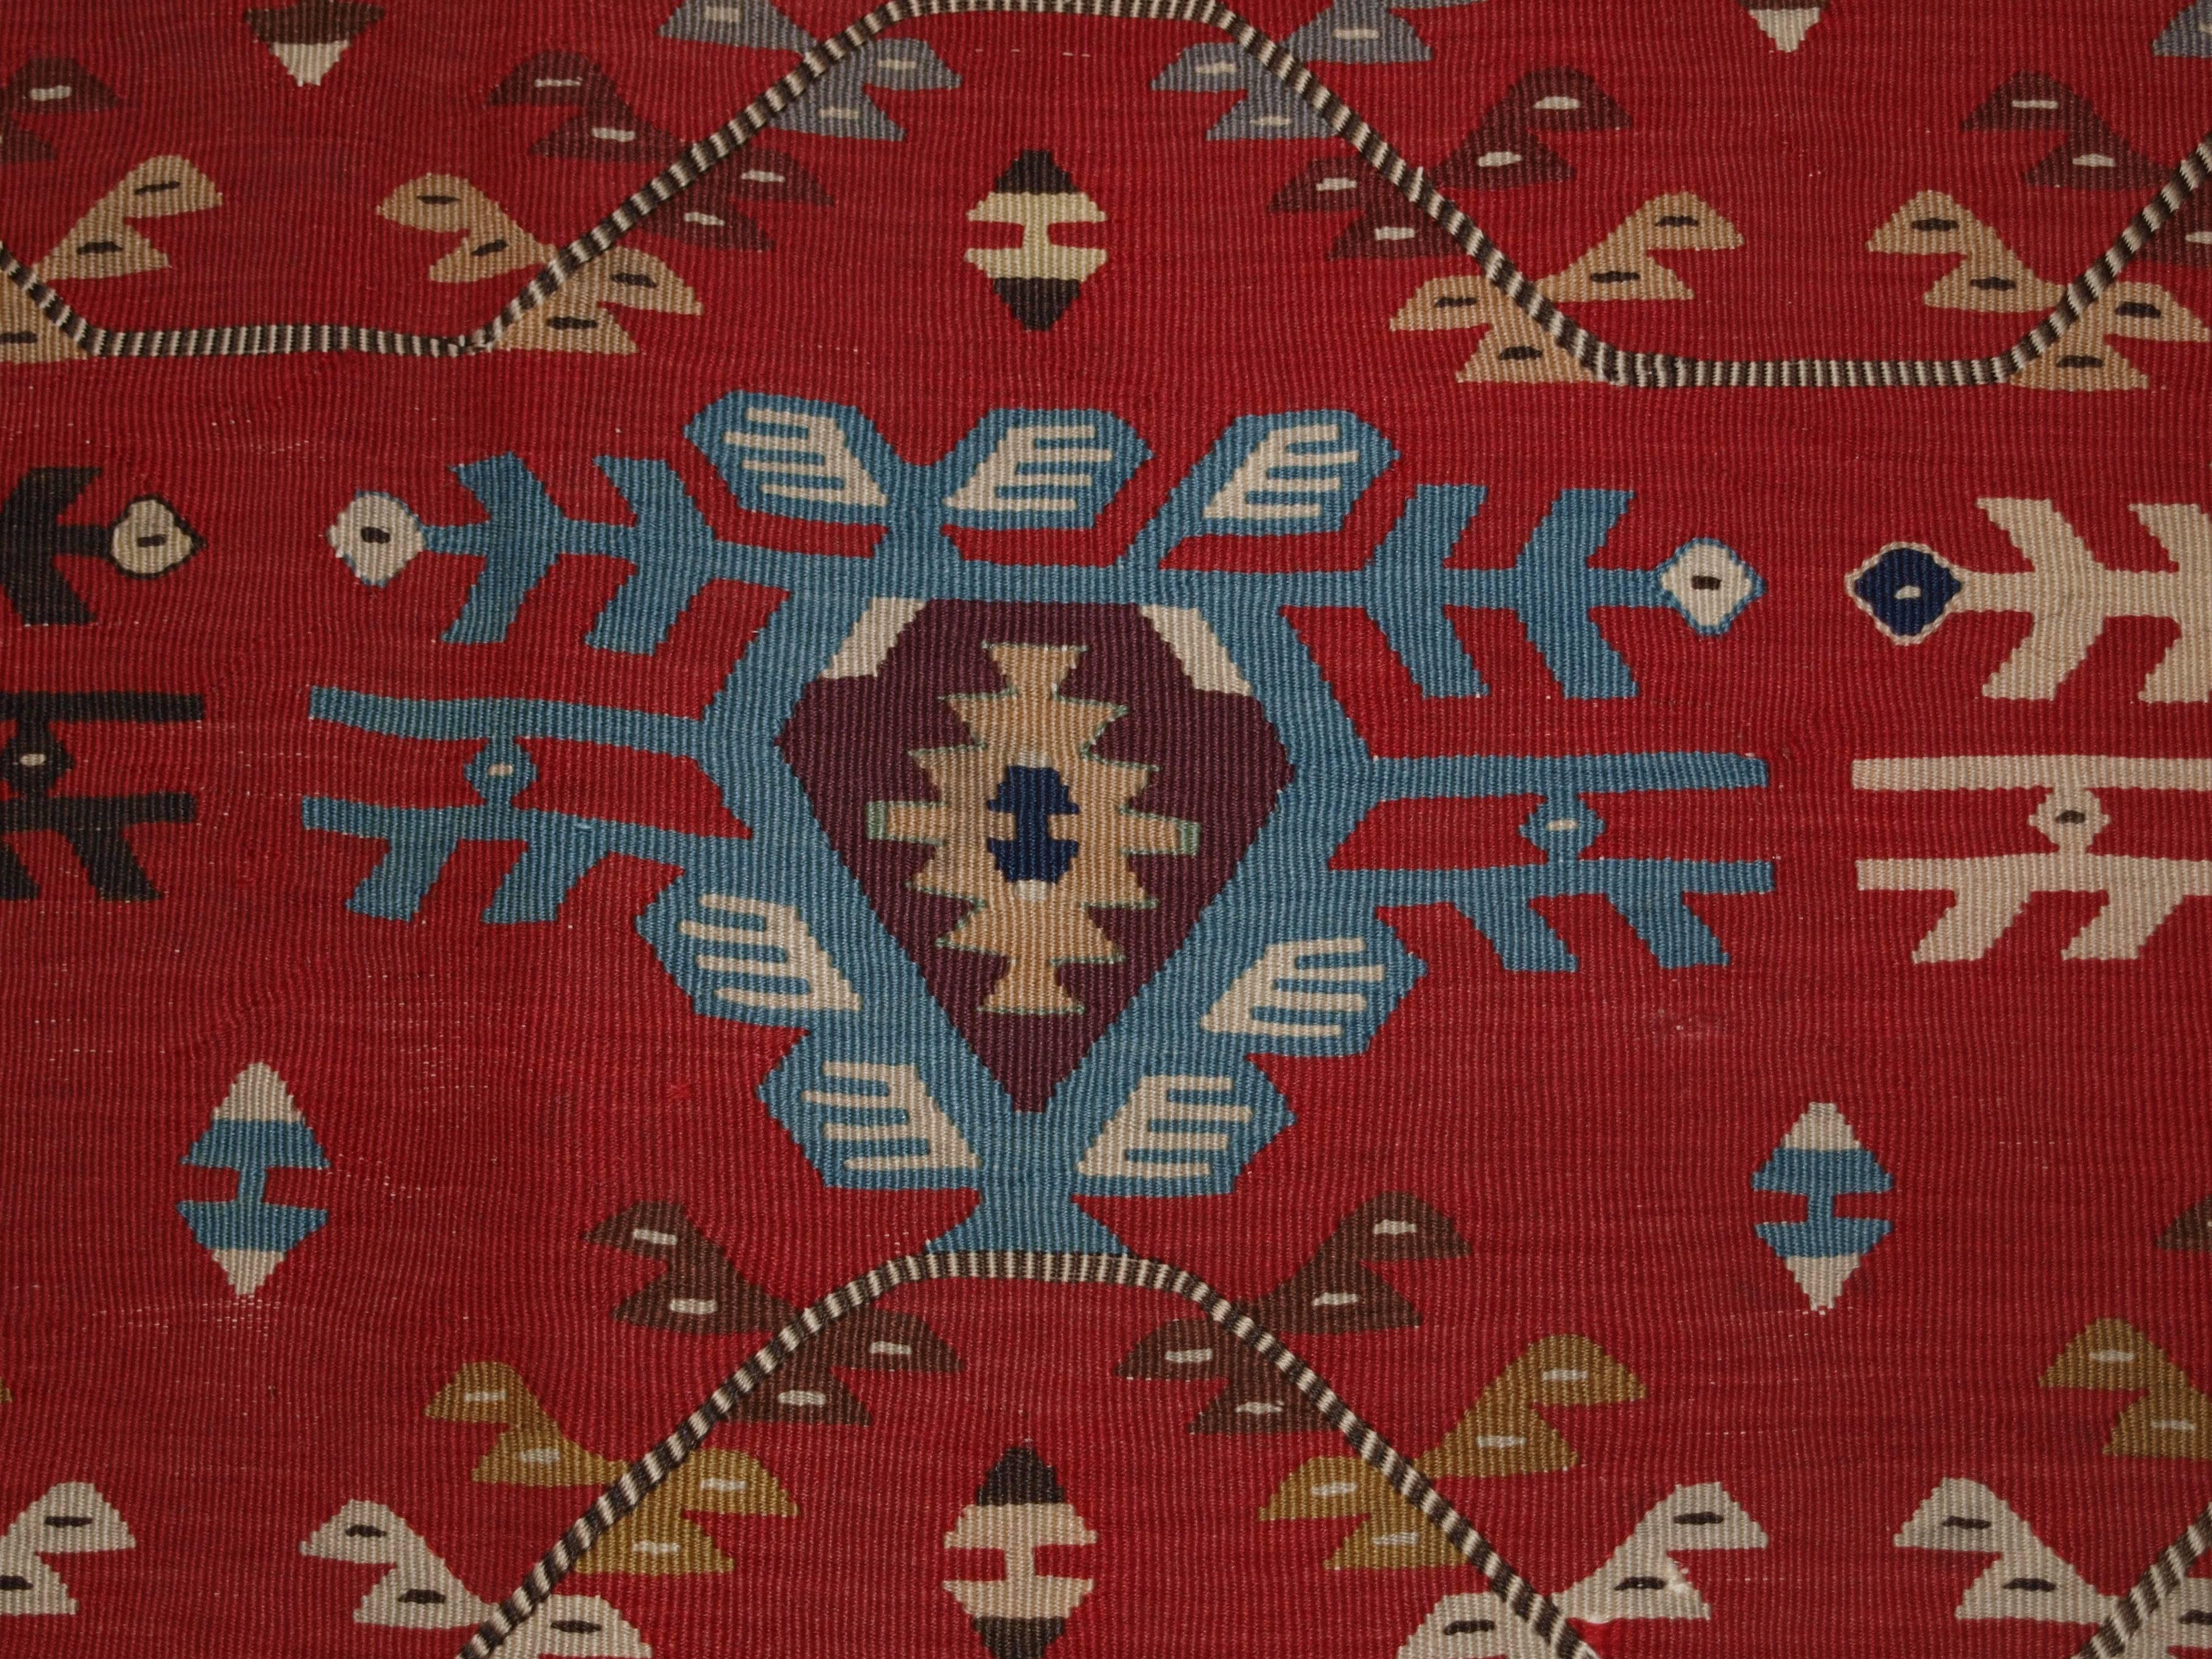 Old Turkish Sarkoy Kilim rug, unusual design on soft red ground, circa 1920.
Size: 8ft 0in x 6ft 0in (243 x 182cm).

Old Anatolian Sharkoy Kilim, Western Turkey

circa 1920

Sharkoy kilims are also known as Sarkoy or Thracian, they originate